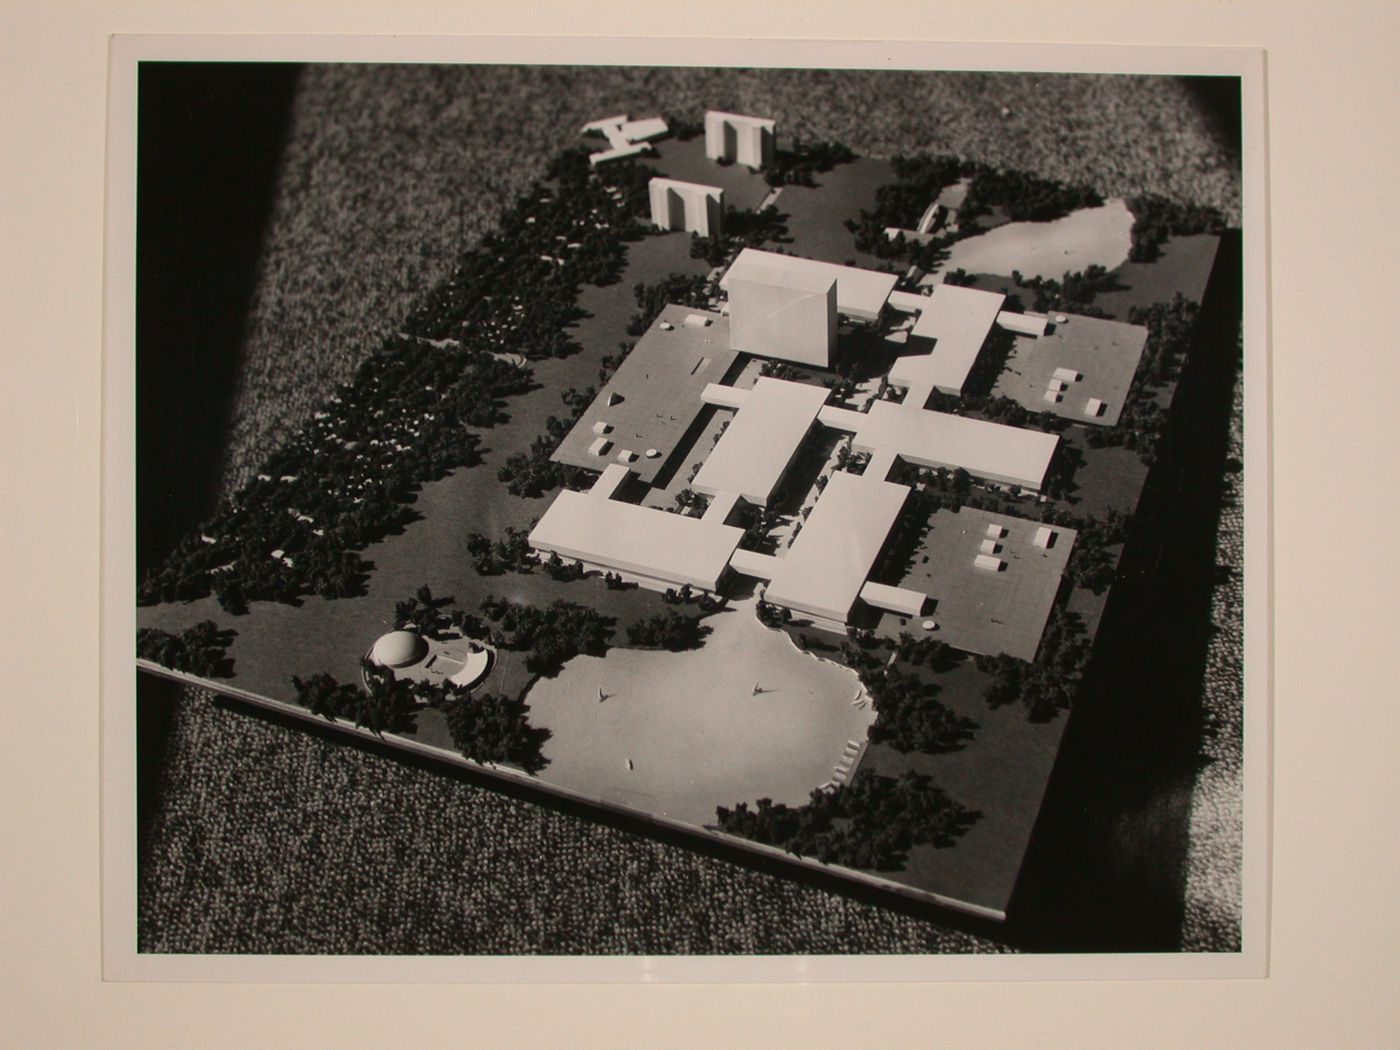 Photograph of a model for a regional shopping area